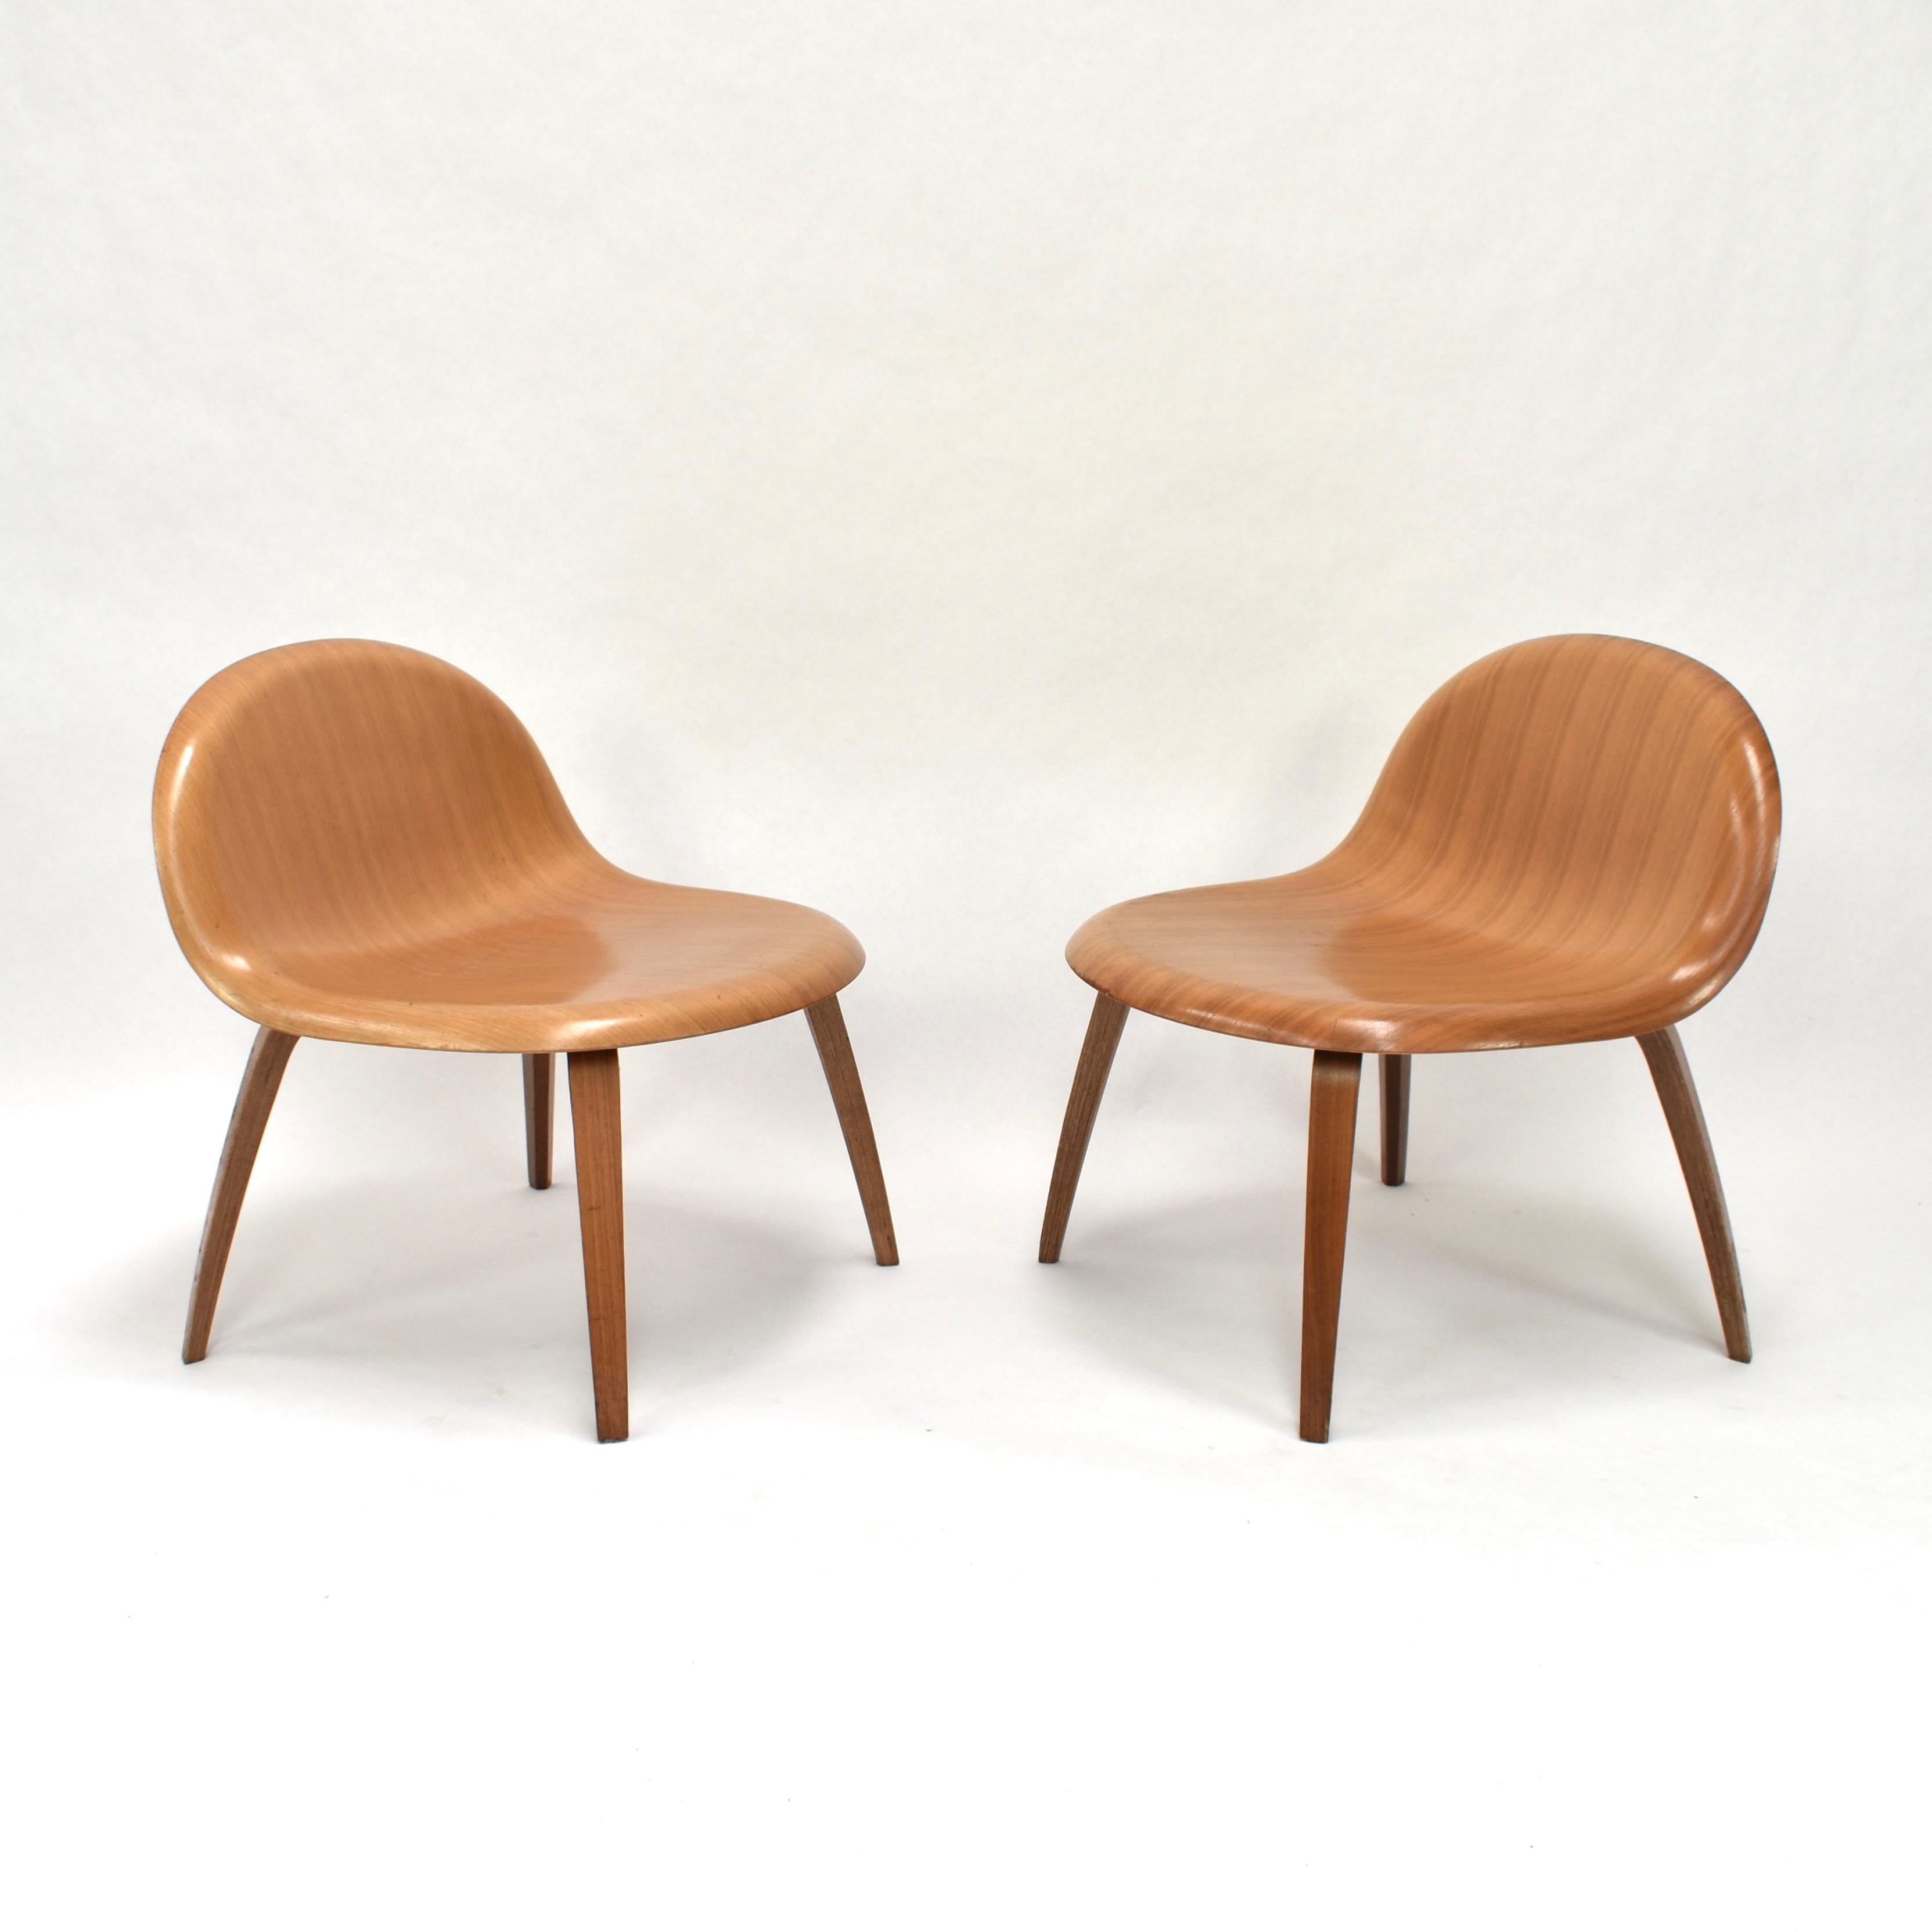 Molded Plywood Lounge Chairs by Boris Berlin and Poul Christiansen for Komplot 1